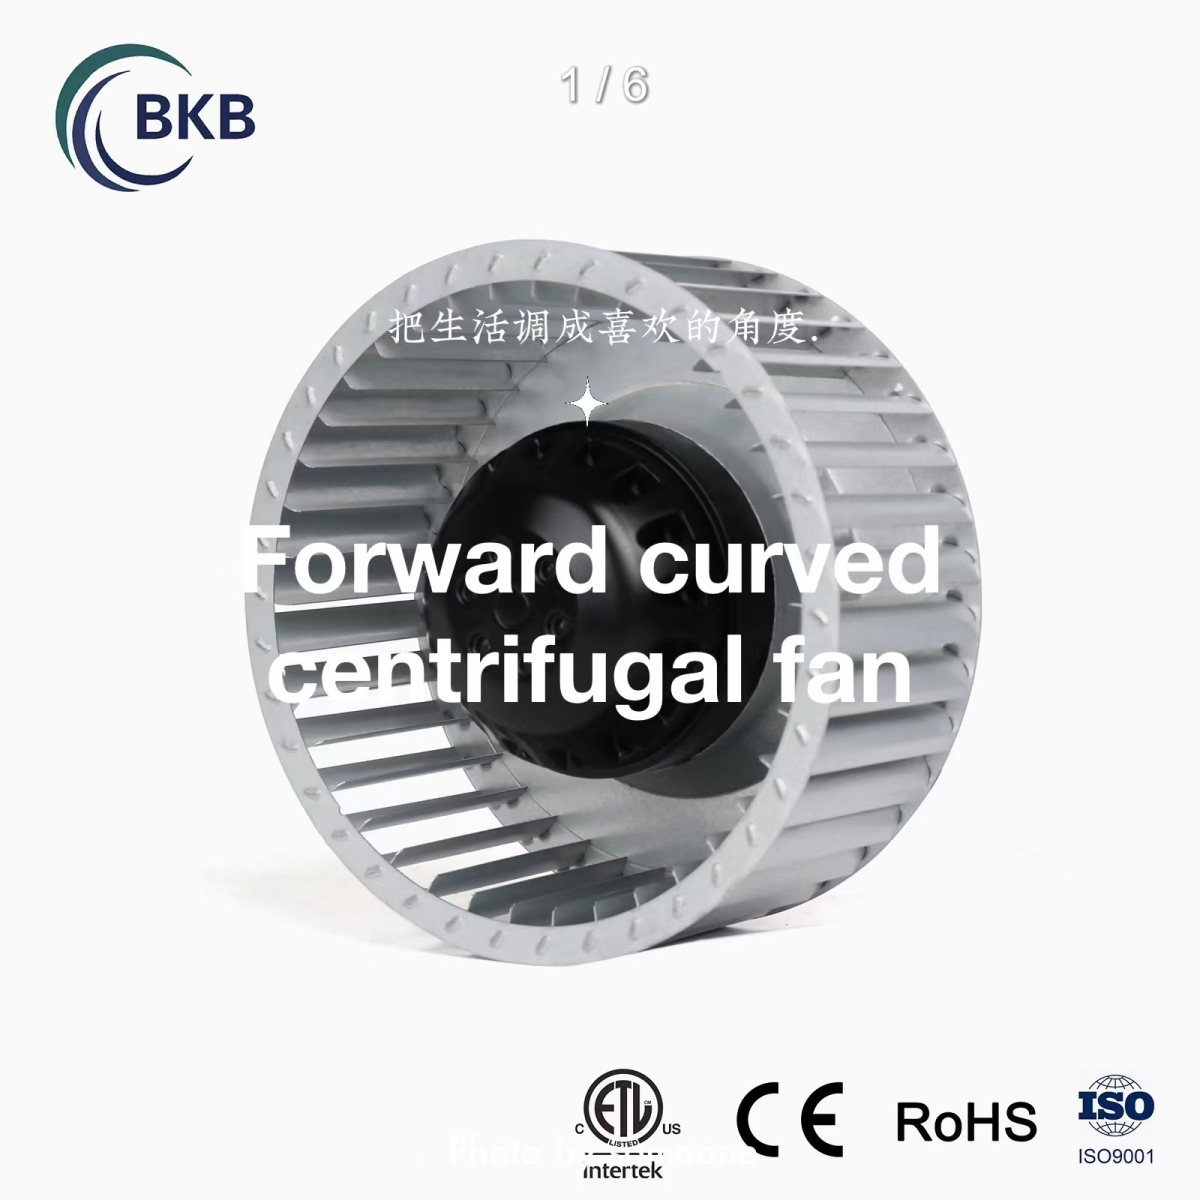 Designed to ventilate hydroponic grow rooms,transfer heating /cooling ,cool AV closets and exhaust odors.-SUNLIGHT BLOWER,Centrifugal Fans, Inline Fans,Motors,Backward curved centrifugal fans ,Forward curved centrifugal fans ,inlet fans, EC fans